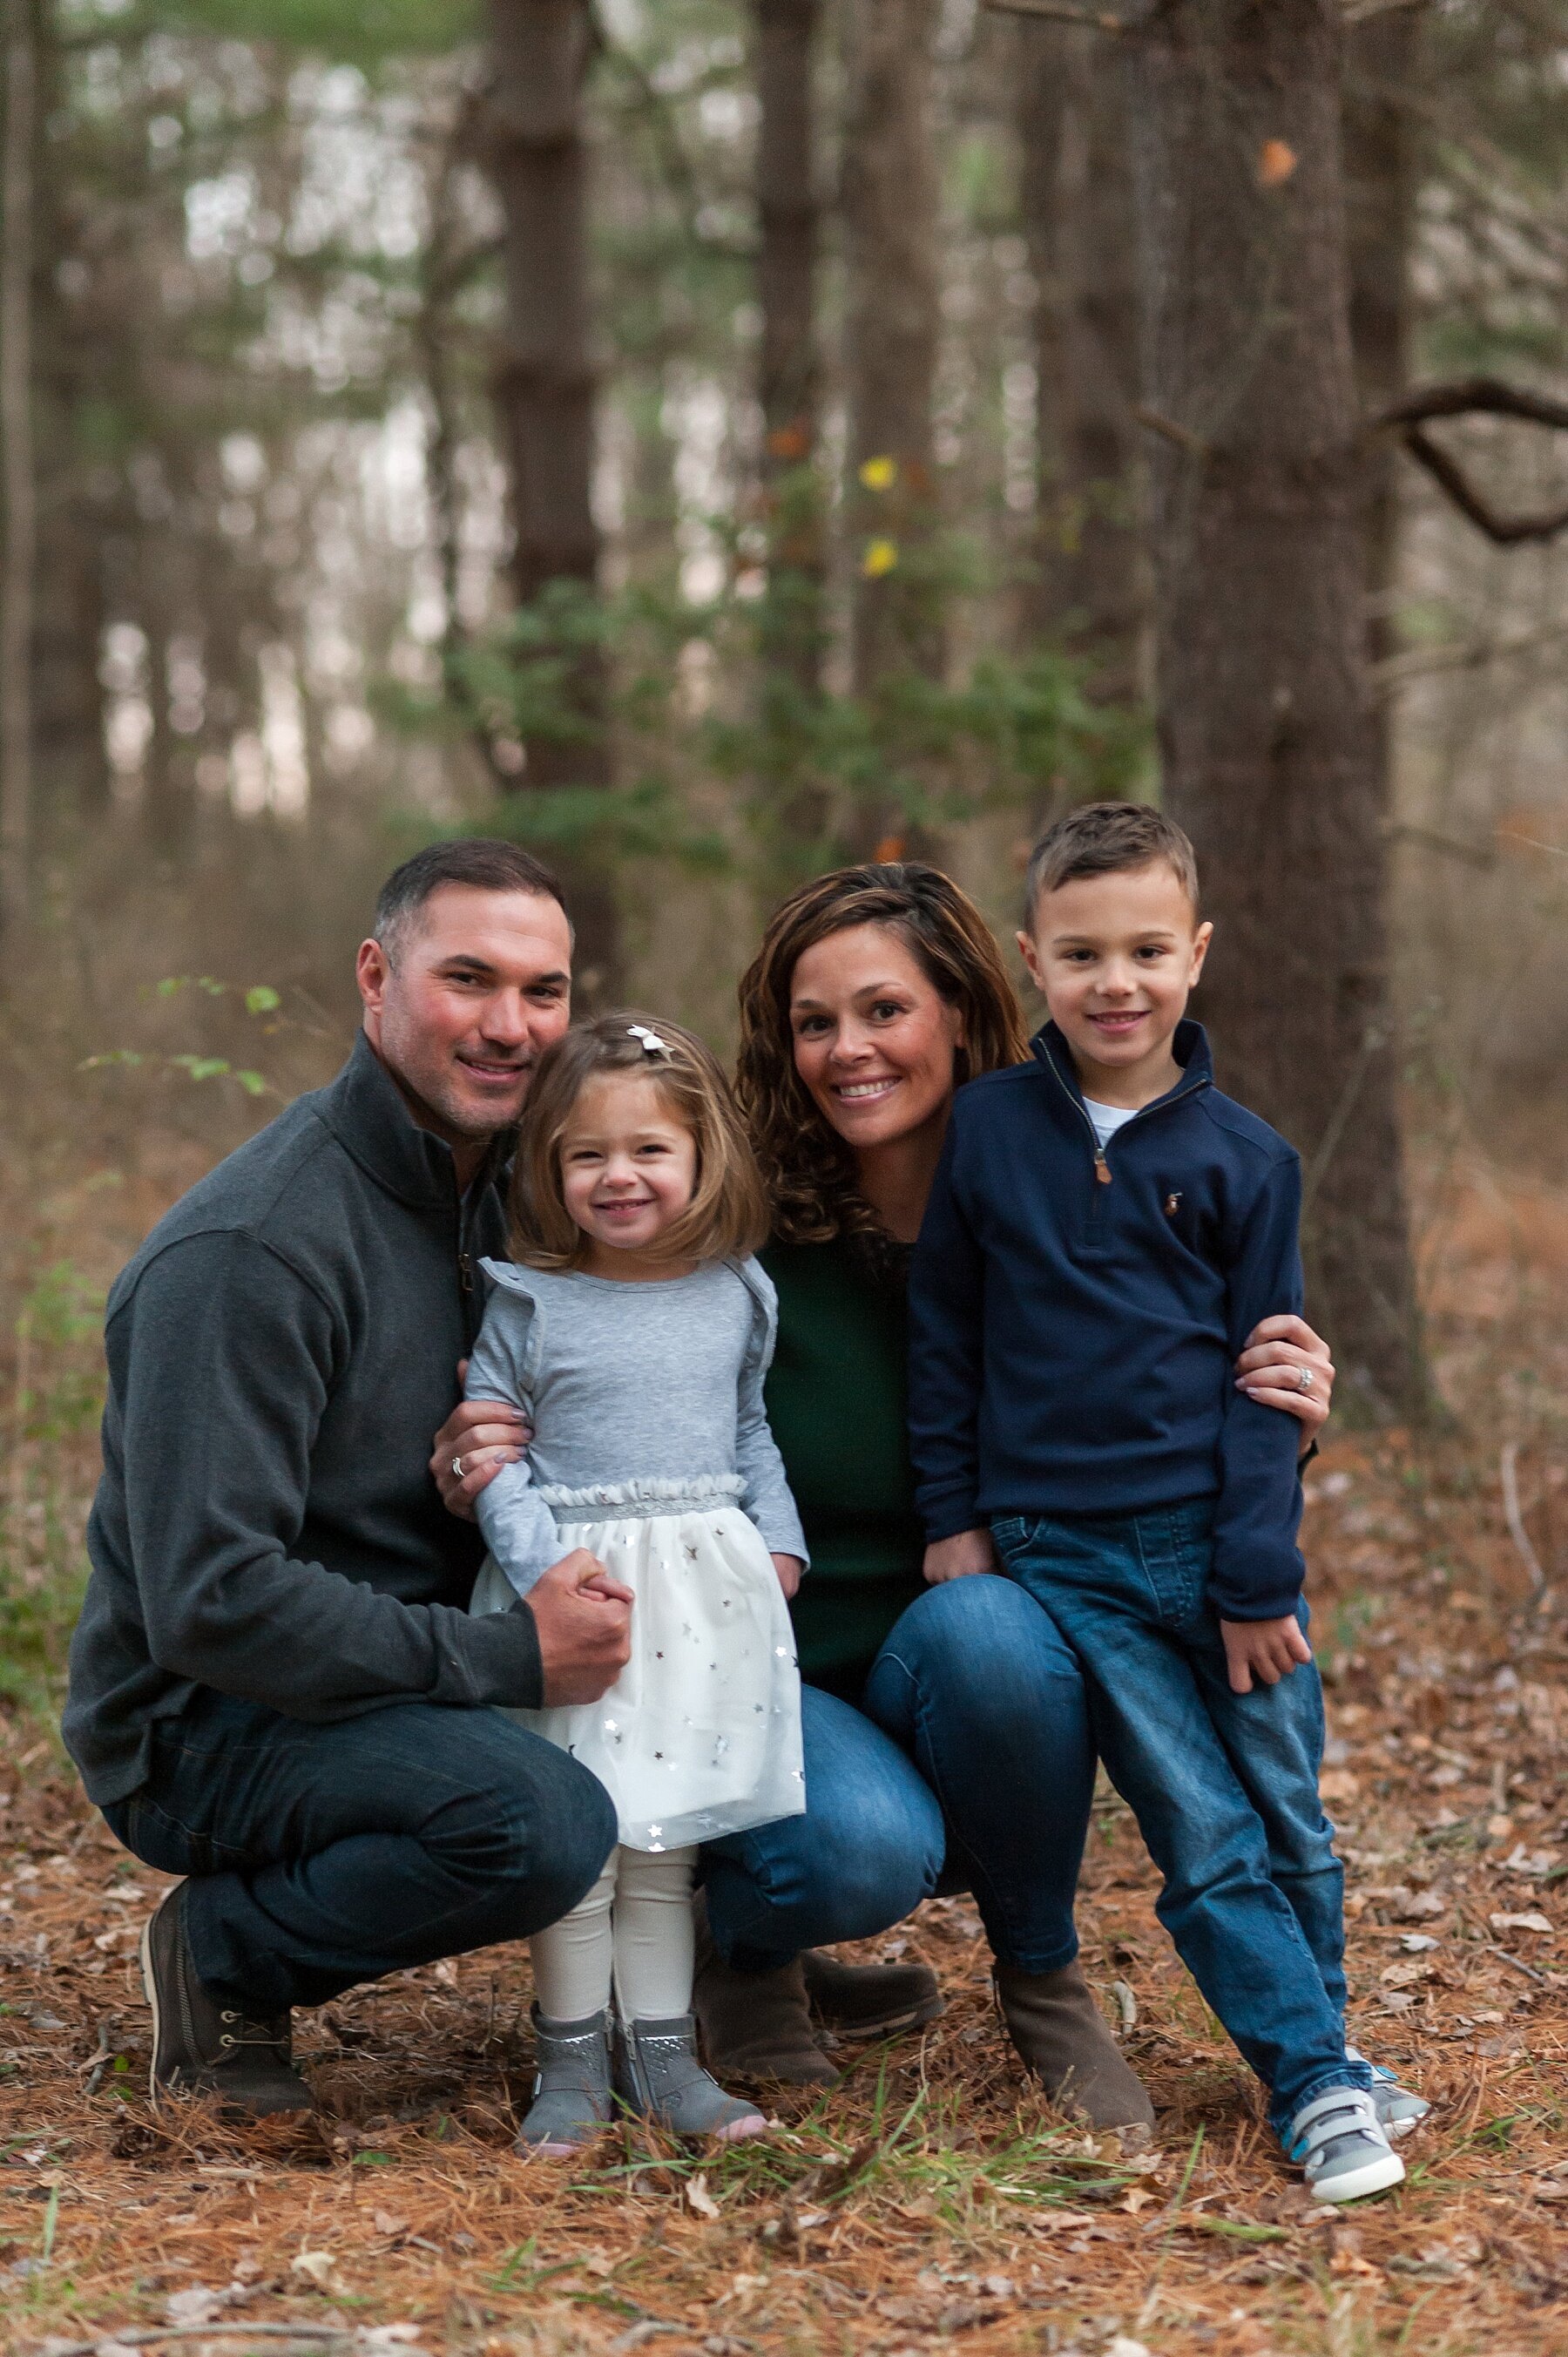 Wendy Zook Photography | Frederick MD family photographer, family photographer, Maryland family photographer, Frederick family photos in the fall